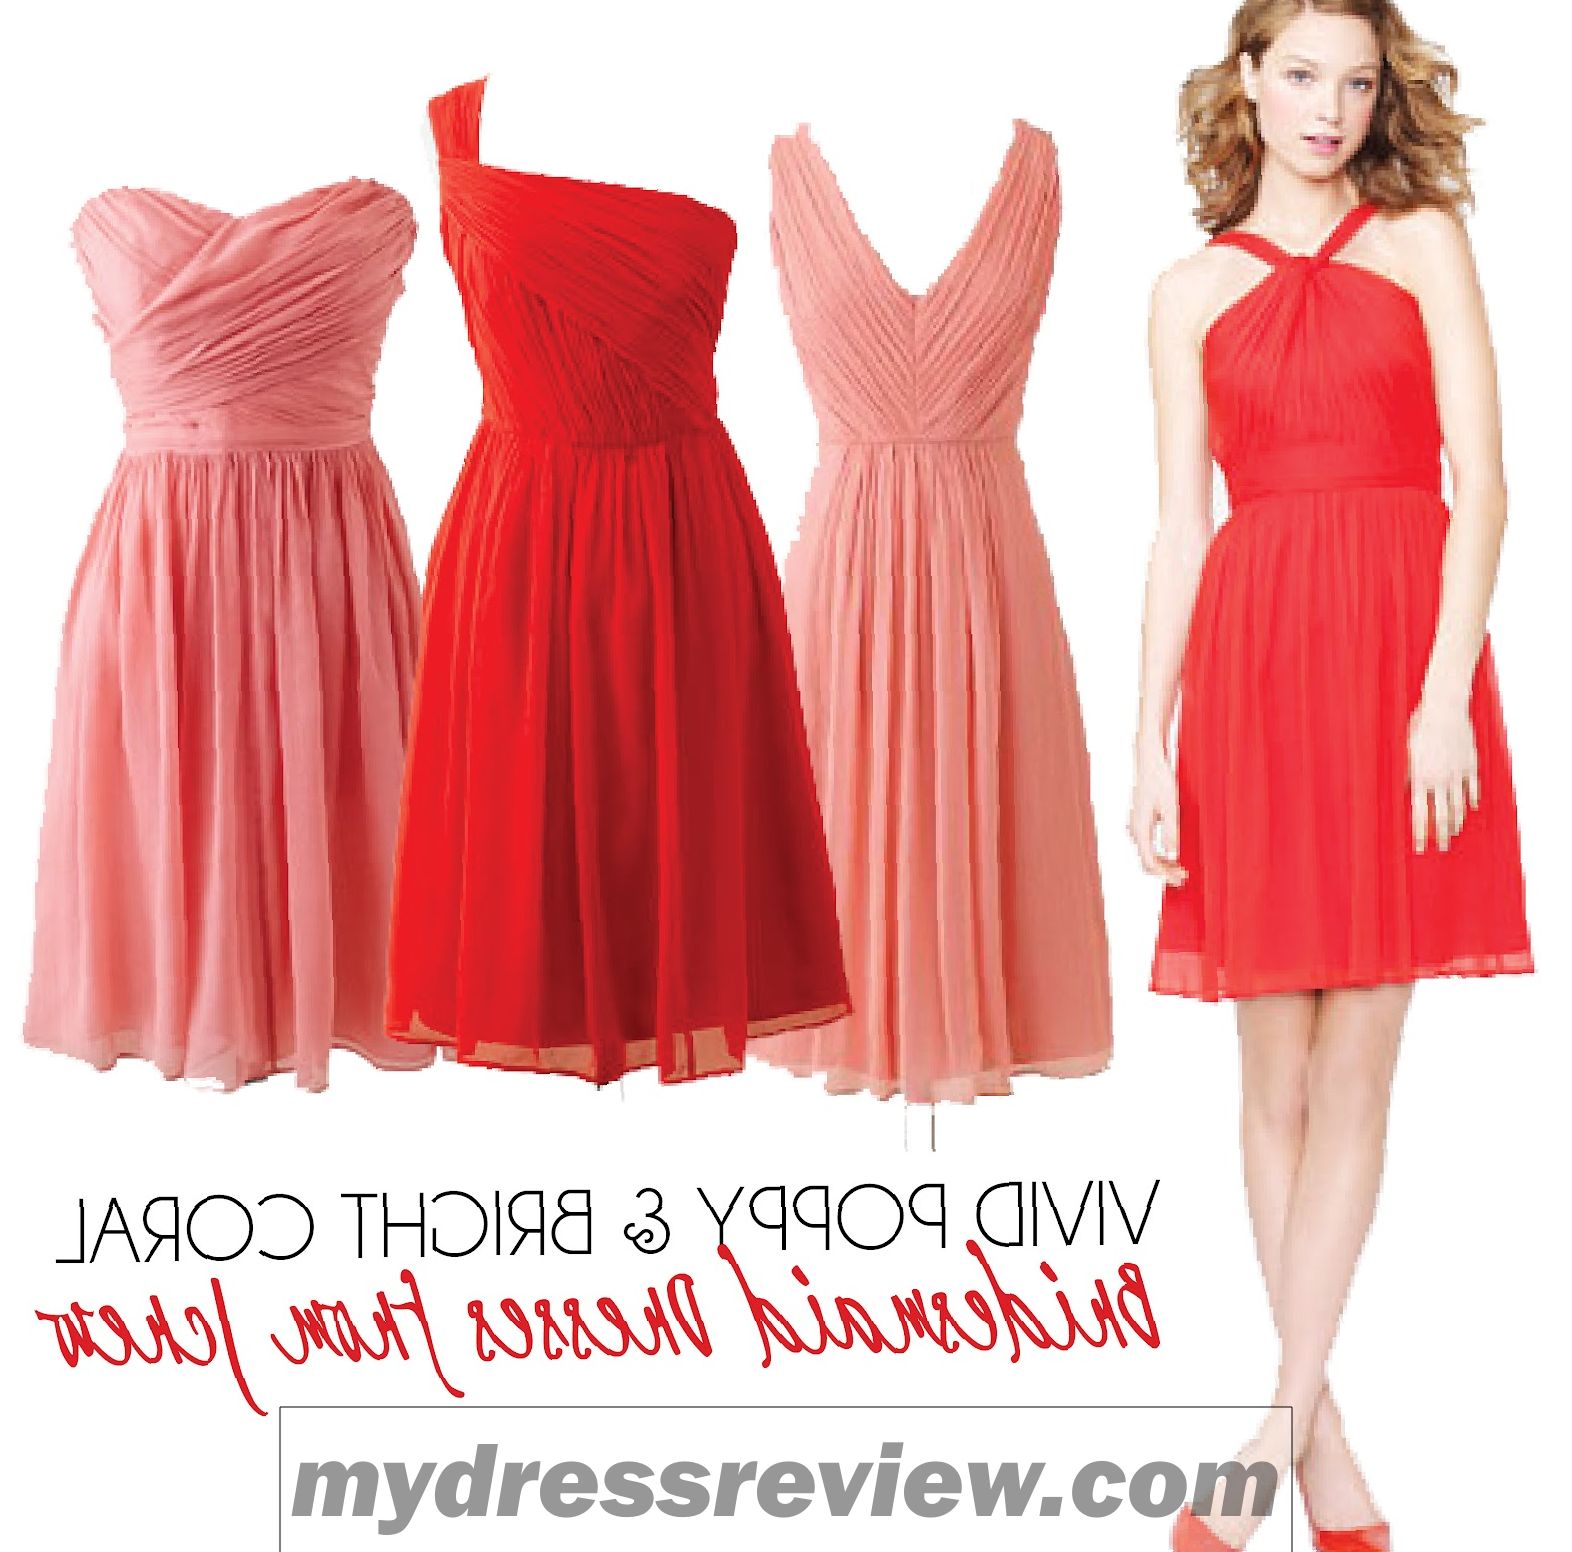 Poppy Red Bridesmaid Dresses And Top 10 Ideas